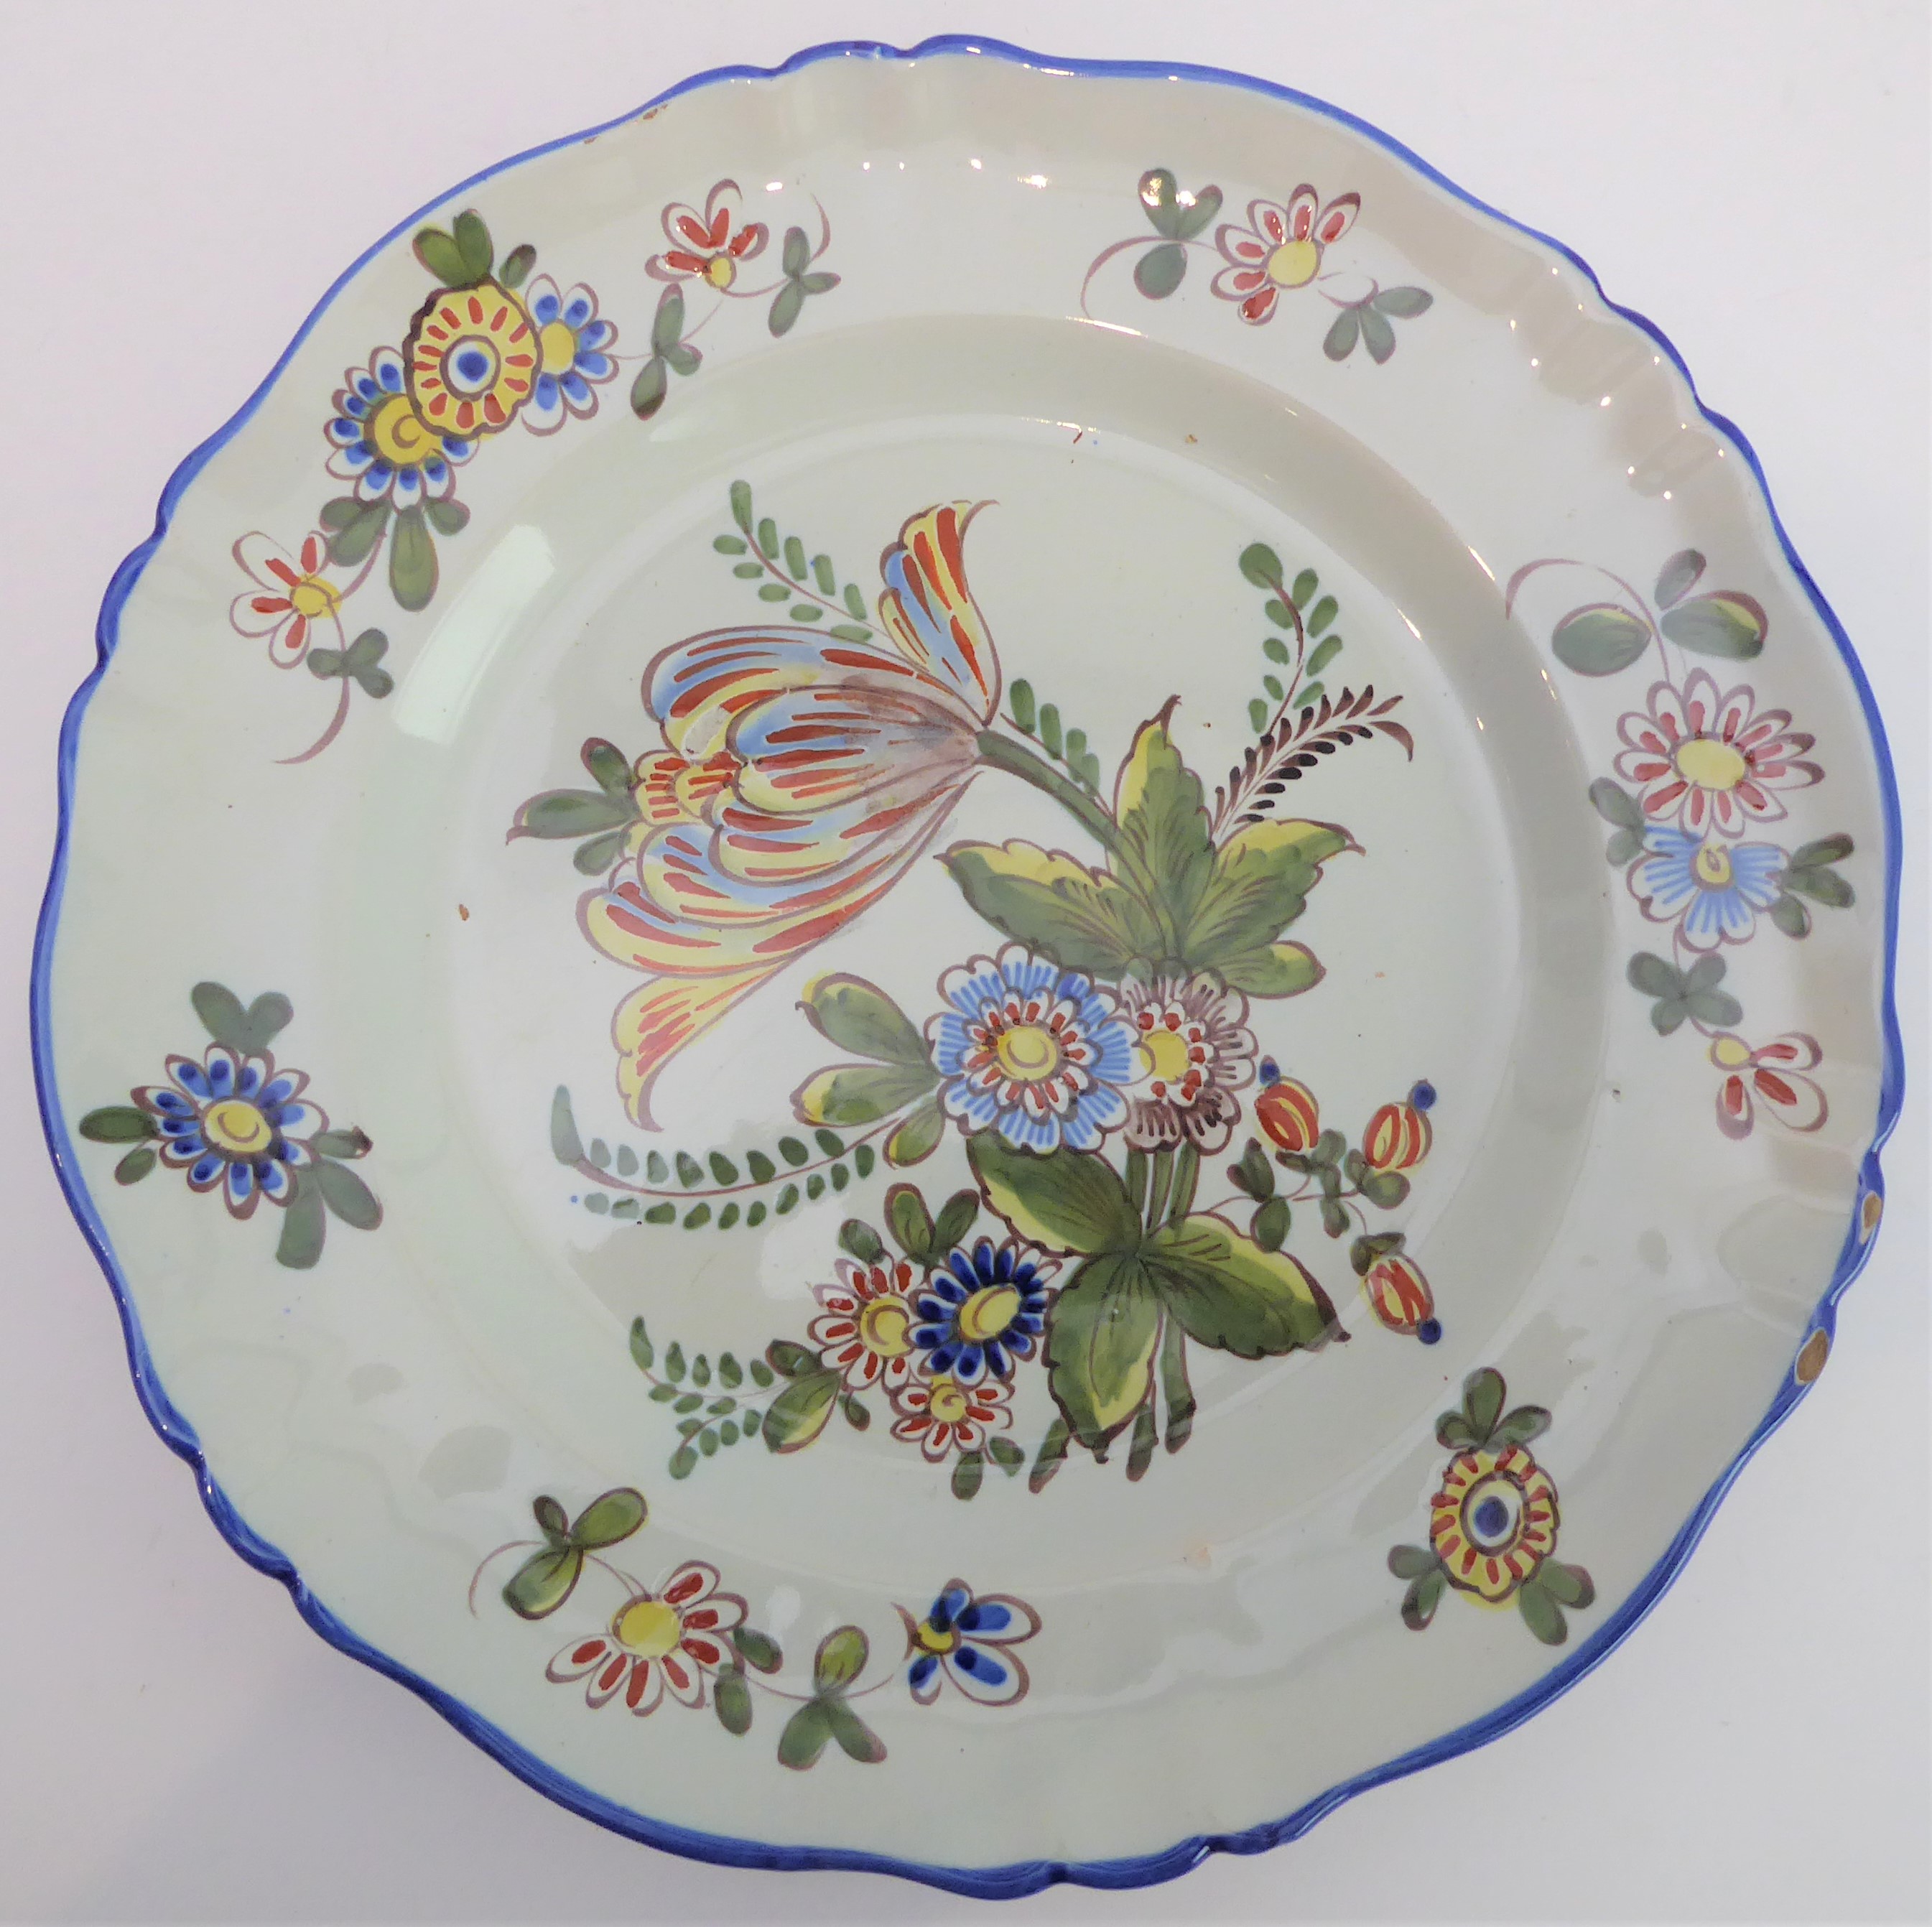 A set of eleven 19th century faience plates by Keller & Guerin at Luneville (early marks). (The - Image 8 of 17